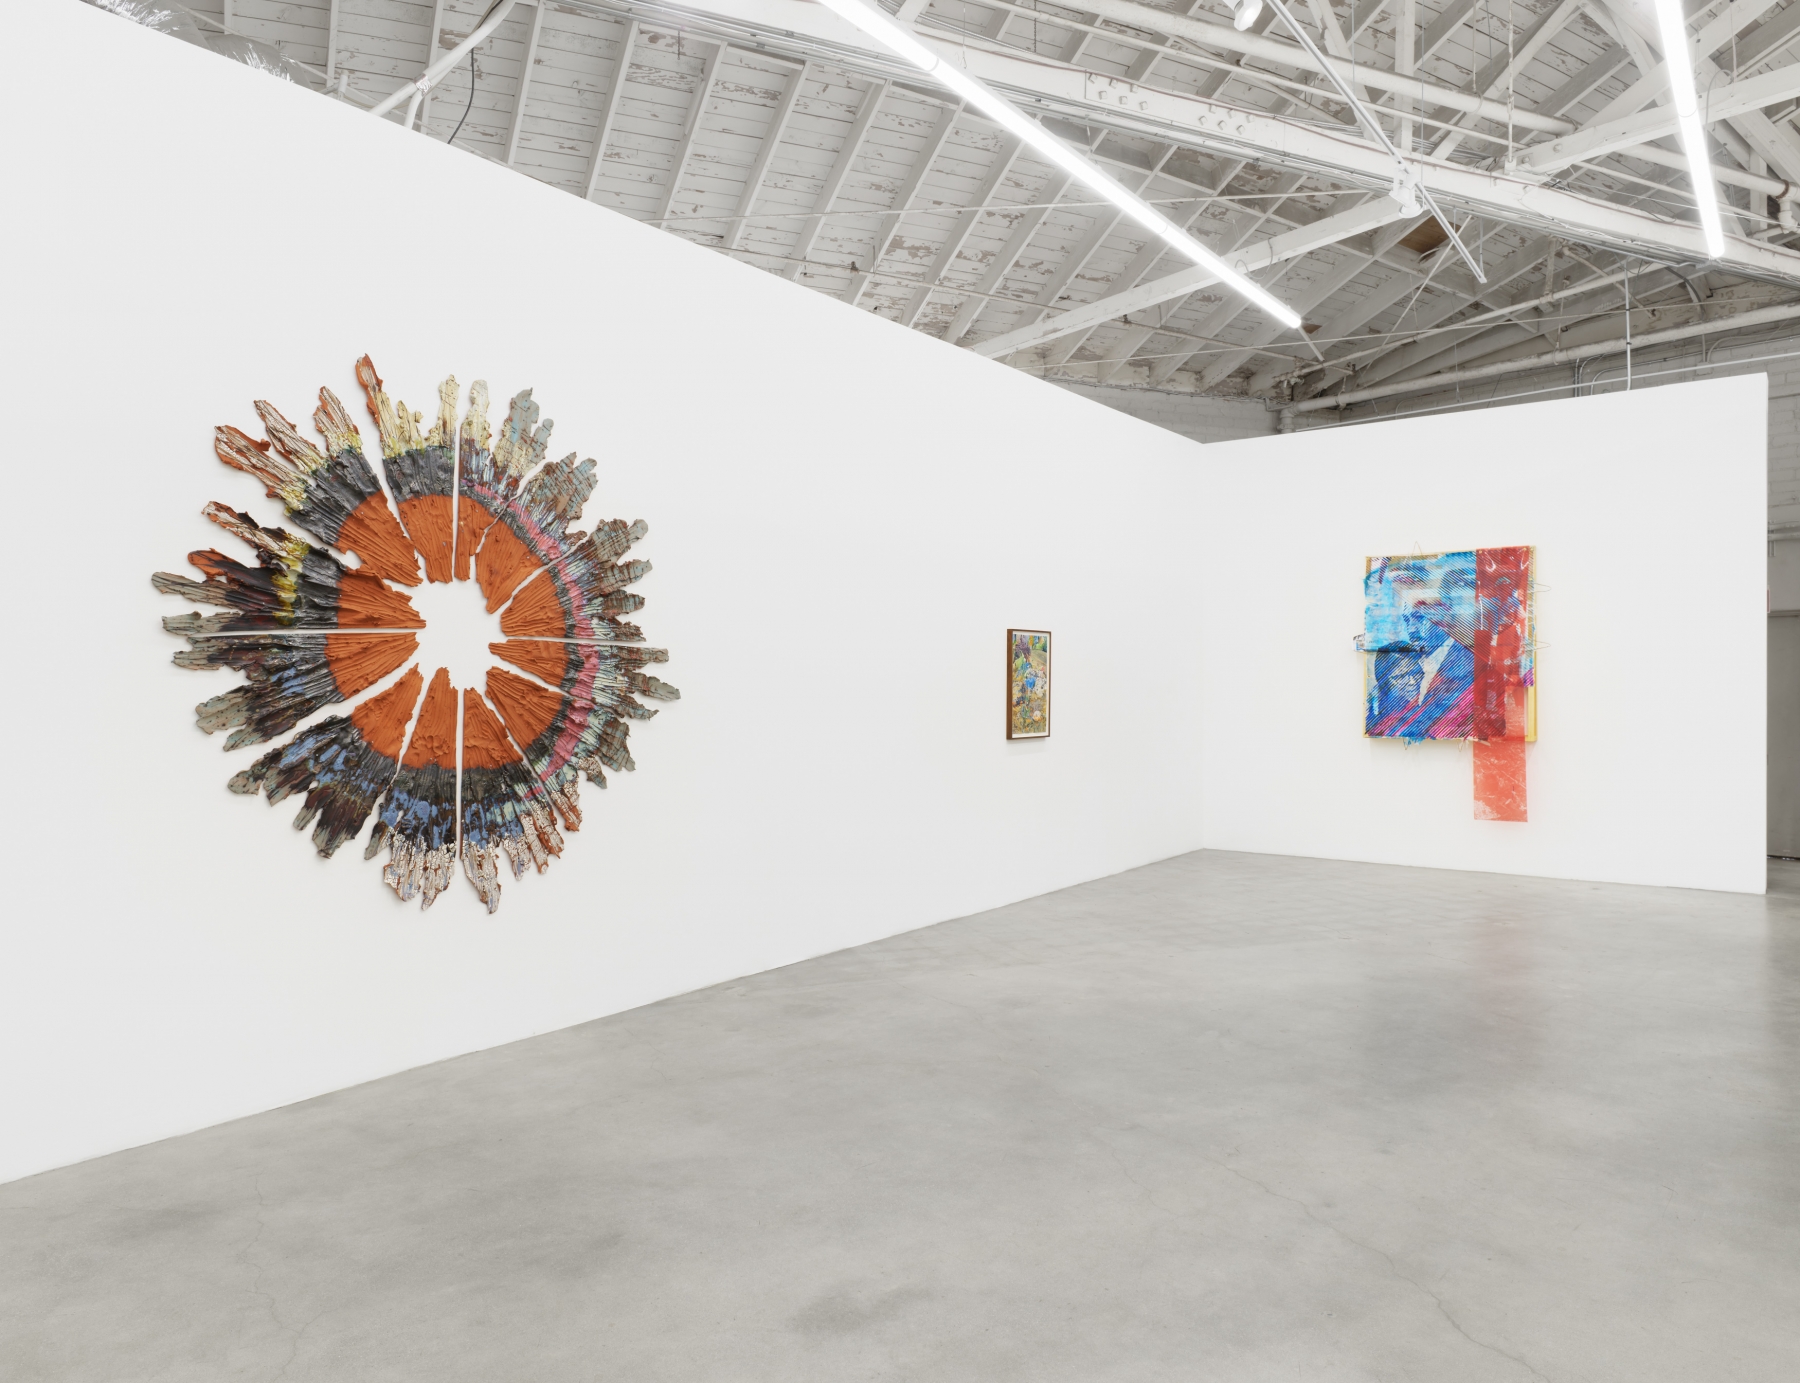 Installation view of Majeure Force, Part One, featuring works by Brie Ruais, Sterling Wells, and Tomashi Jackson. 